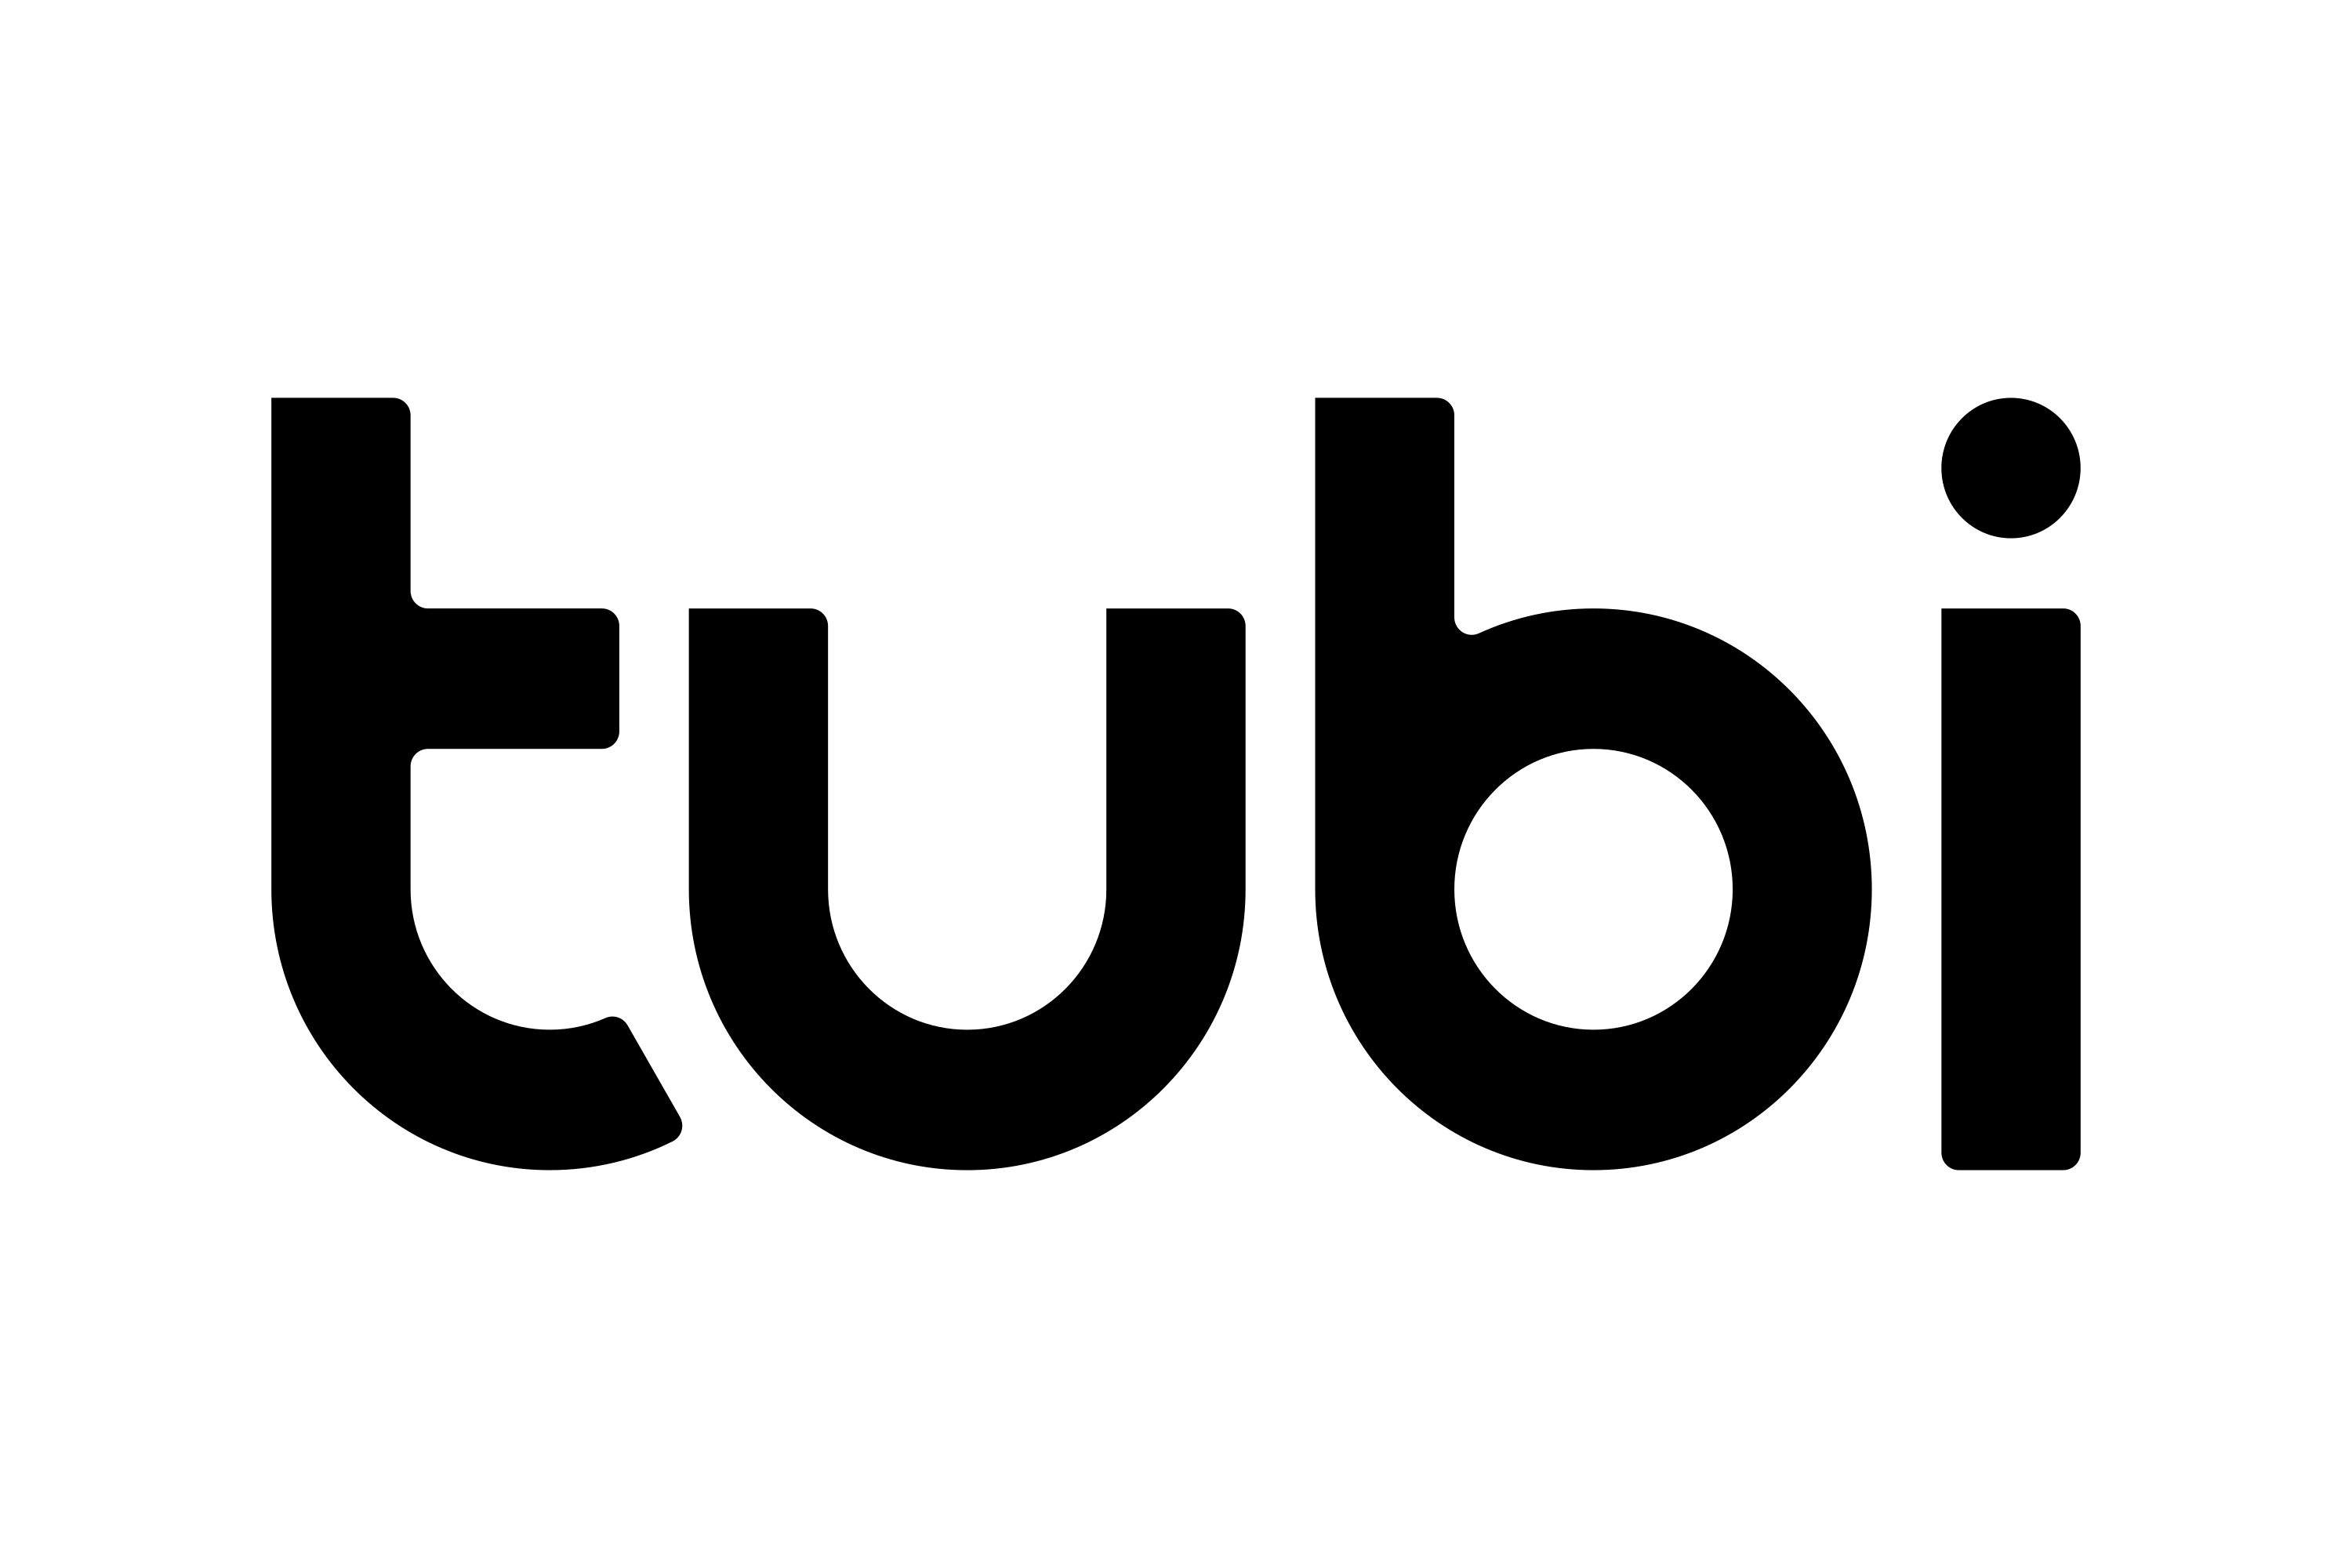 Tubi Rolls Out New FIFA World Cup Channel Ahead of 2022 Tournament in Qatar